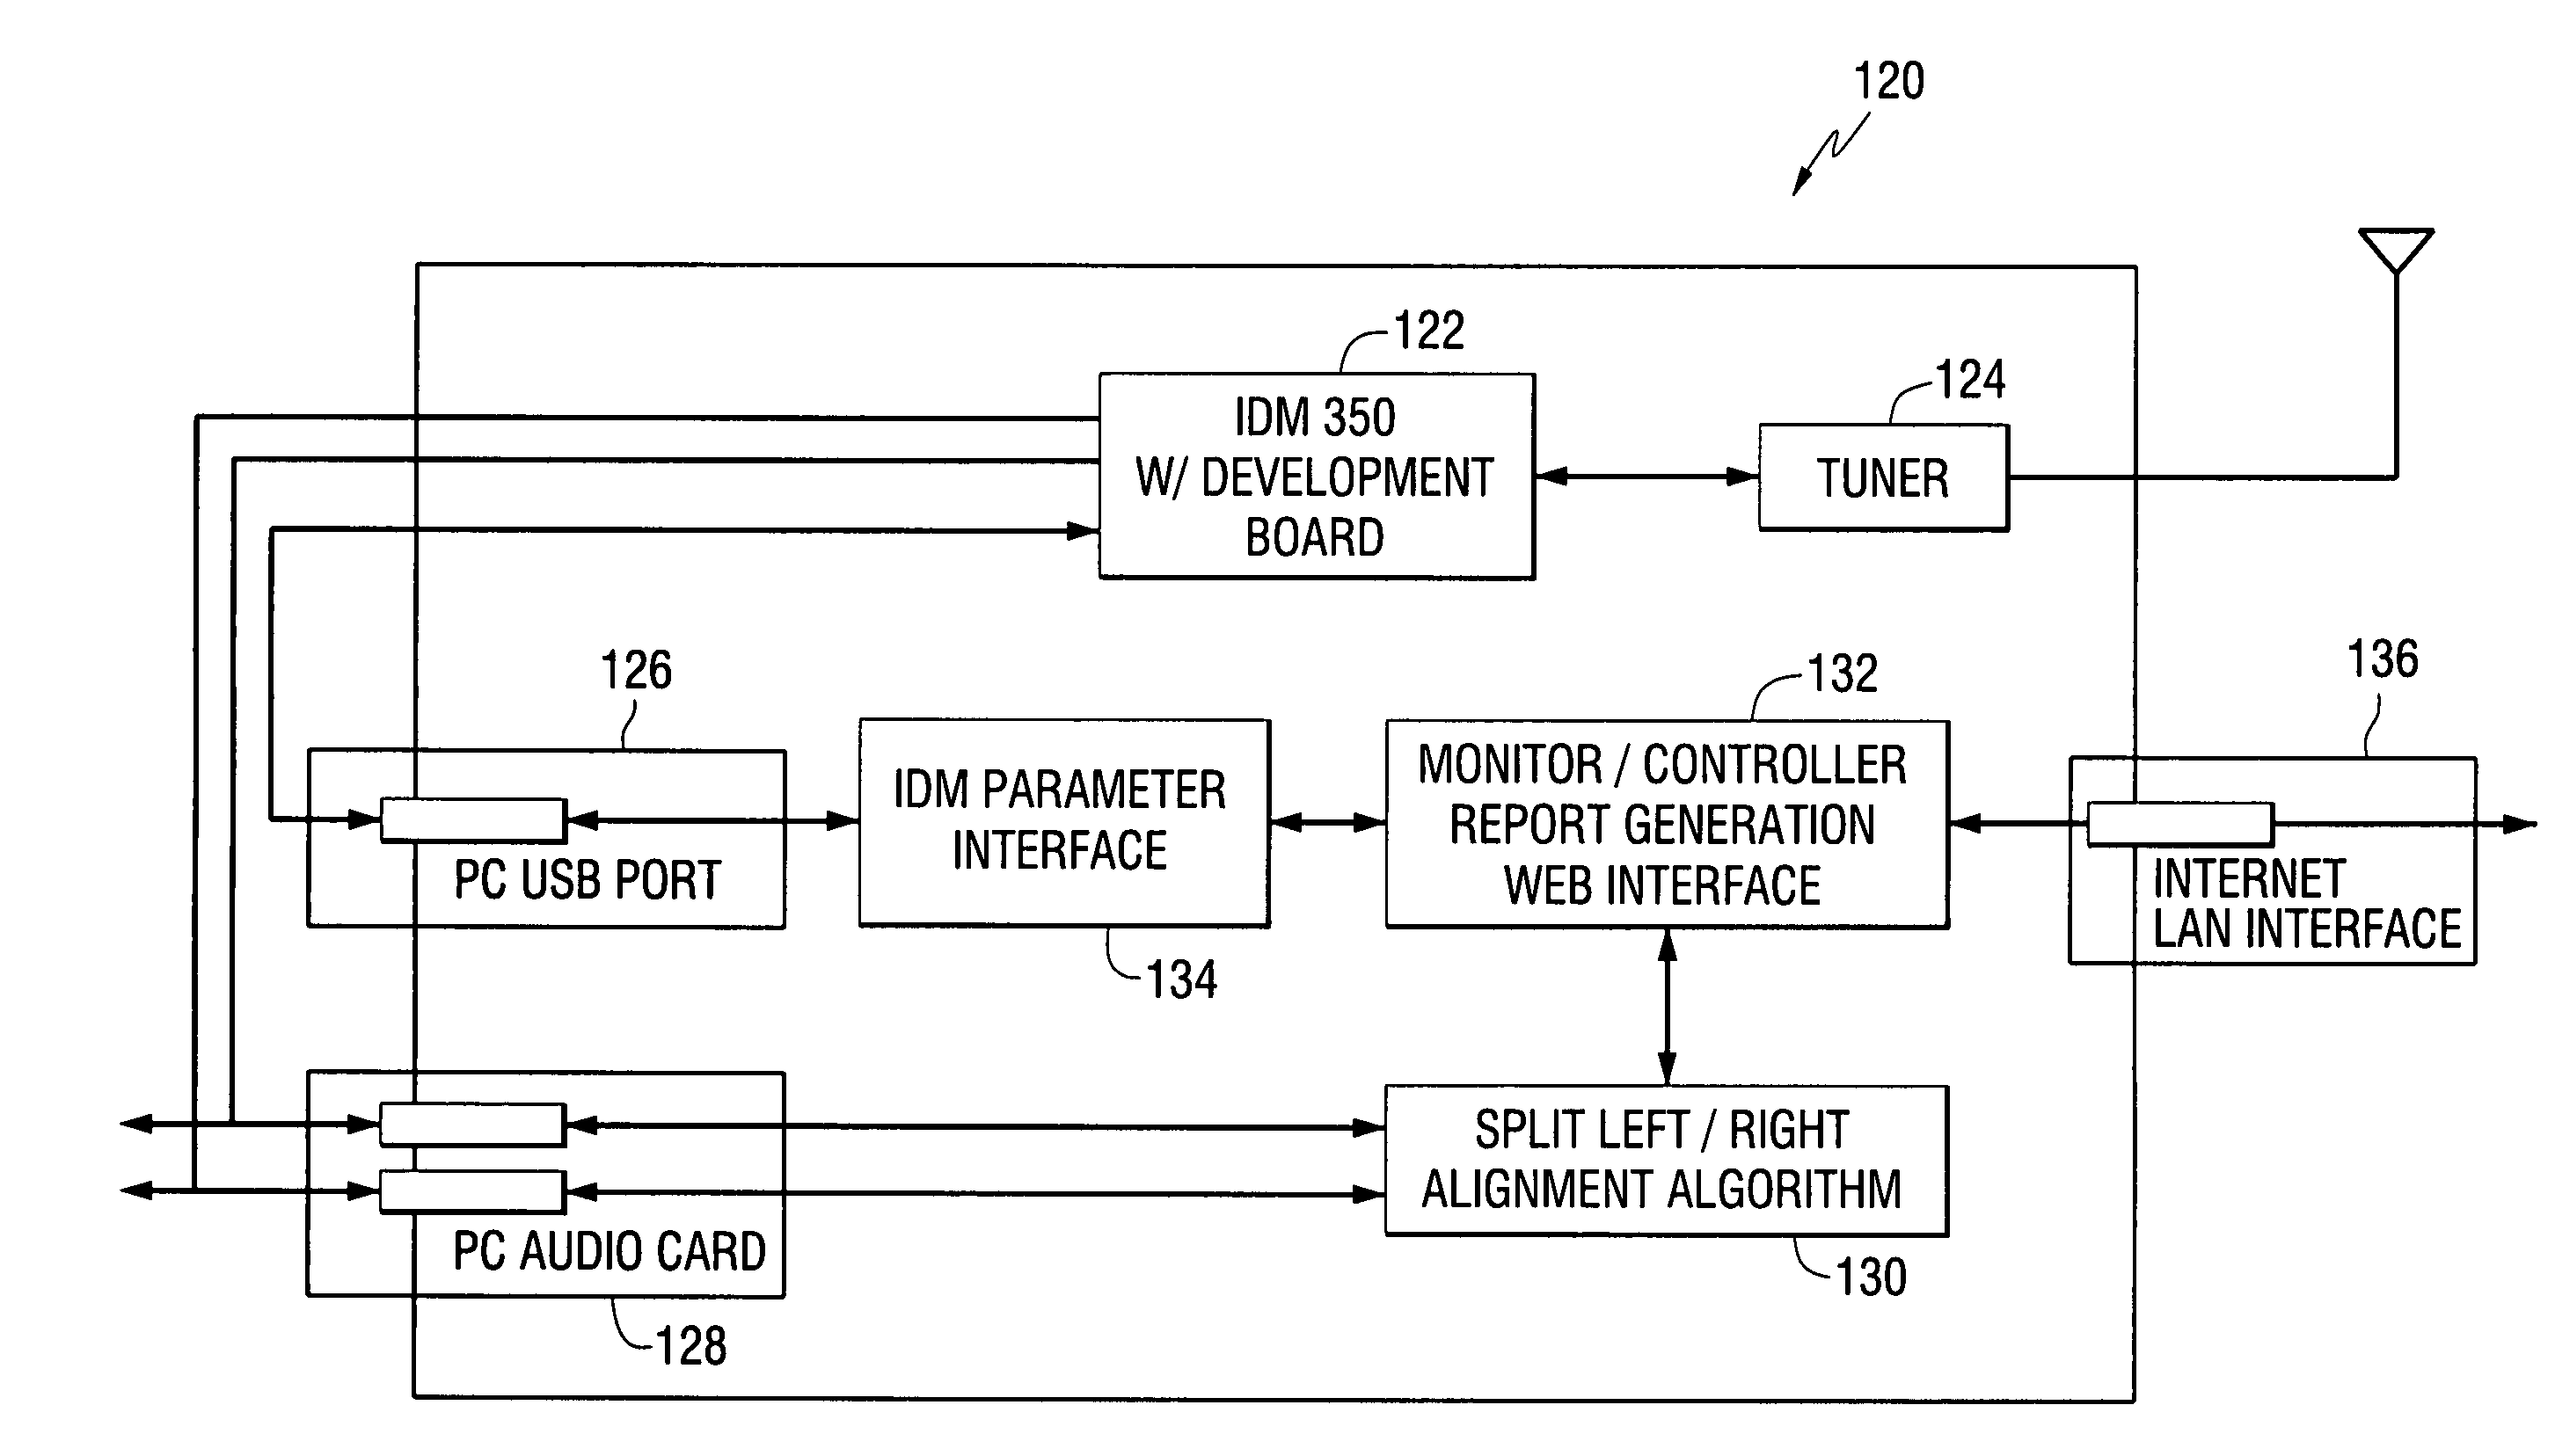 Method for alignment of analog and digital audio in a hybrid radio waveform